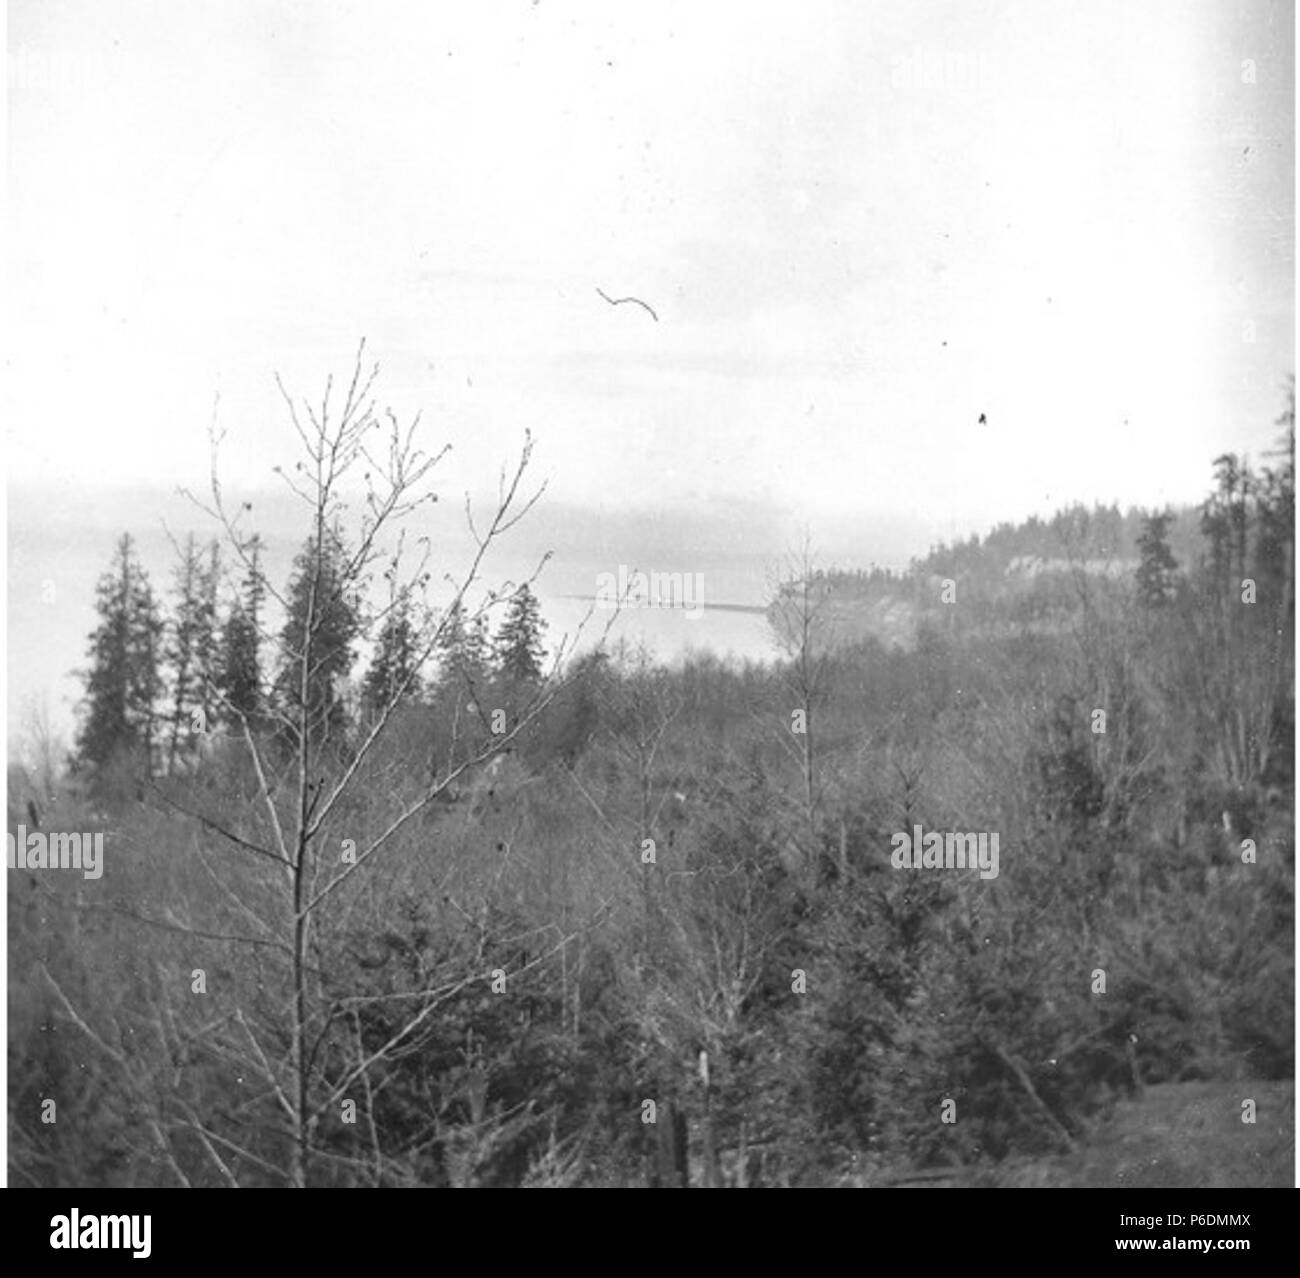 . English: Overlooking West Point Beach, Fort Lawton, Washington, March 5, 1899 . English: Text from Kiehl log: West Point from Sisters. March 5, 1899 . Album 2.199 Subjects (LCSH): West Point (King County, Wash.); Fort Lawton (Seattle, Wash.); Beaches--Washington (State)--Seattle; Military bases--Washington (State)--Seattle  . 1899 66 Overlooking West Point Beach, Fort Lawton, Washington, March 5, 1899 (KIEHL 173) Stock Photo